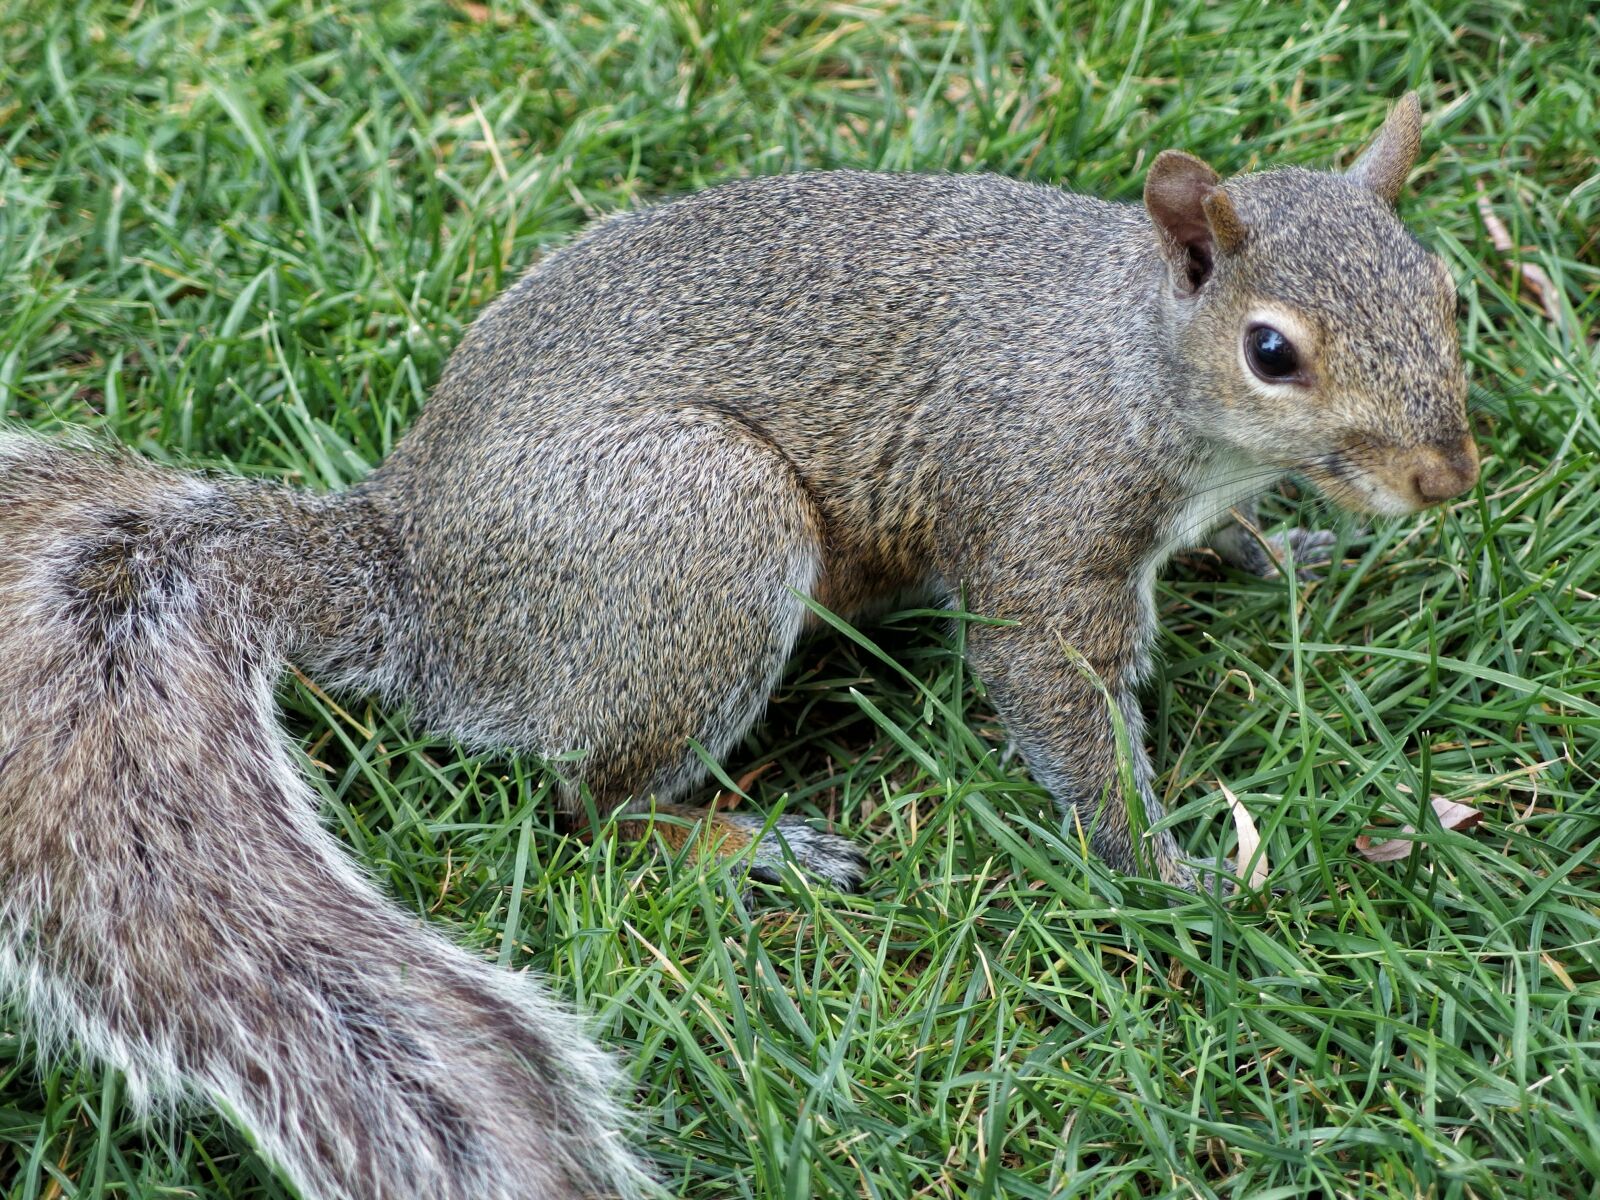 Olympus XZ-2 iHS sample photo. Squirrel, nature, rodent photography